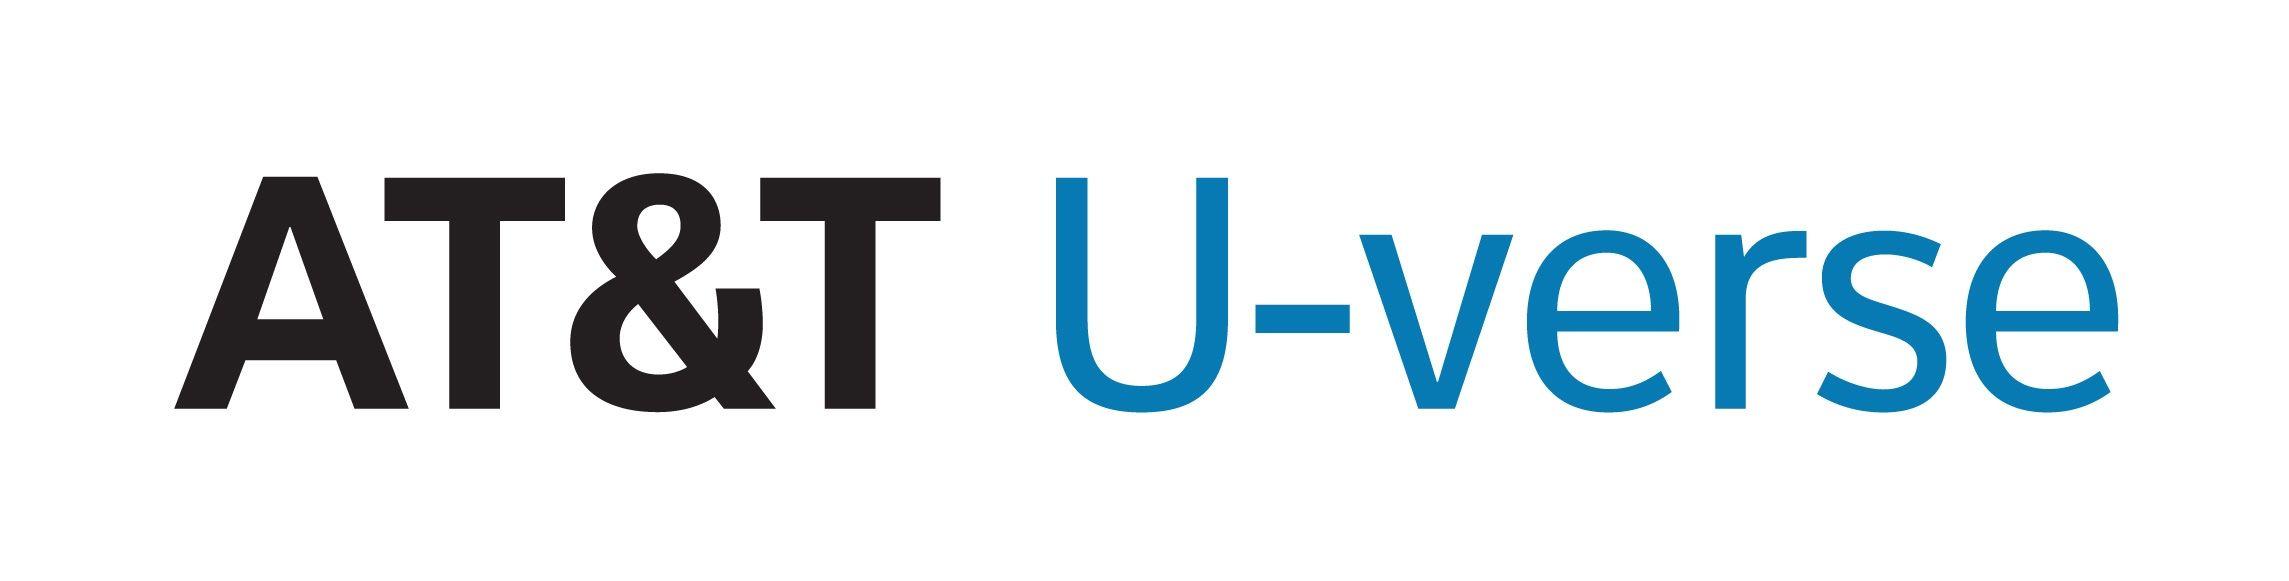 U-verse Logo - AT&T Uverse Internet 18 Mbps, $28 Month For A Year